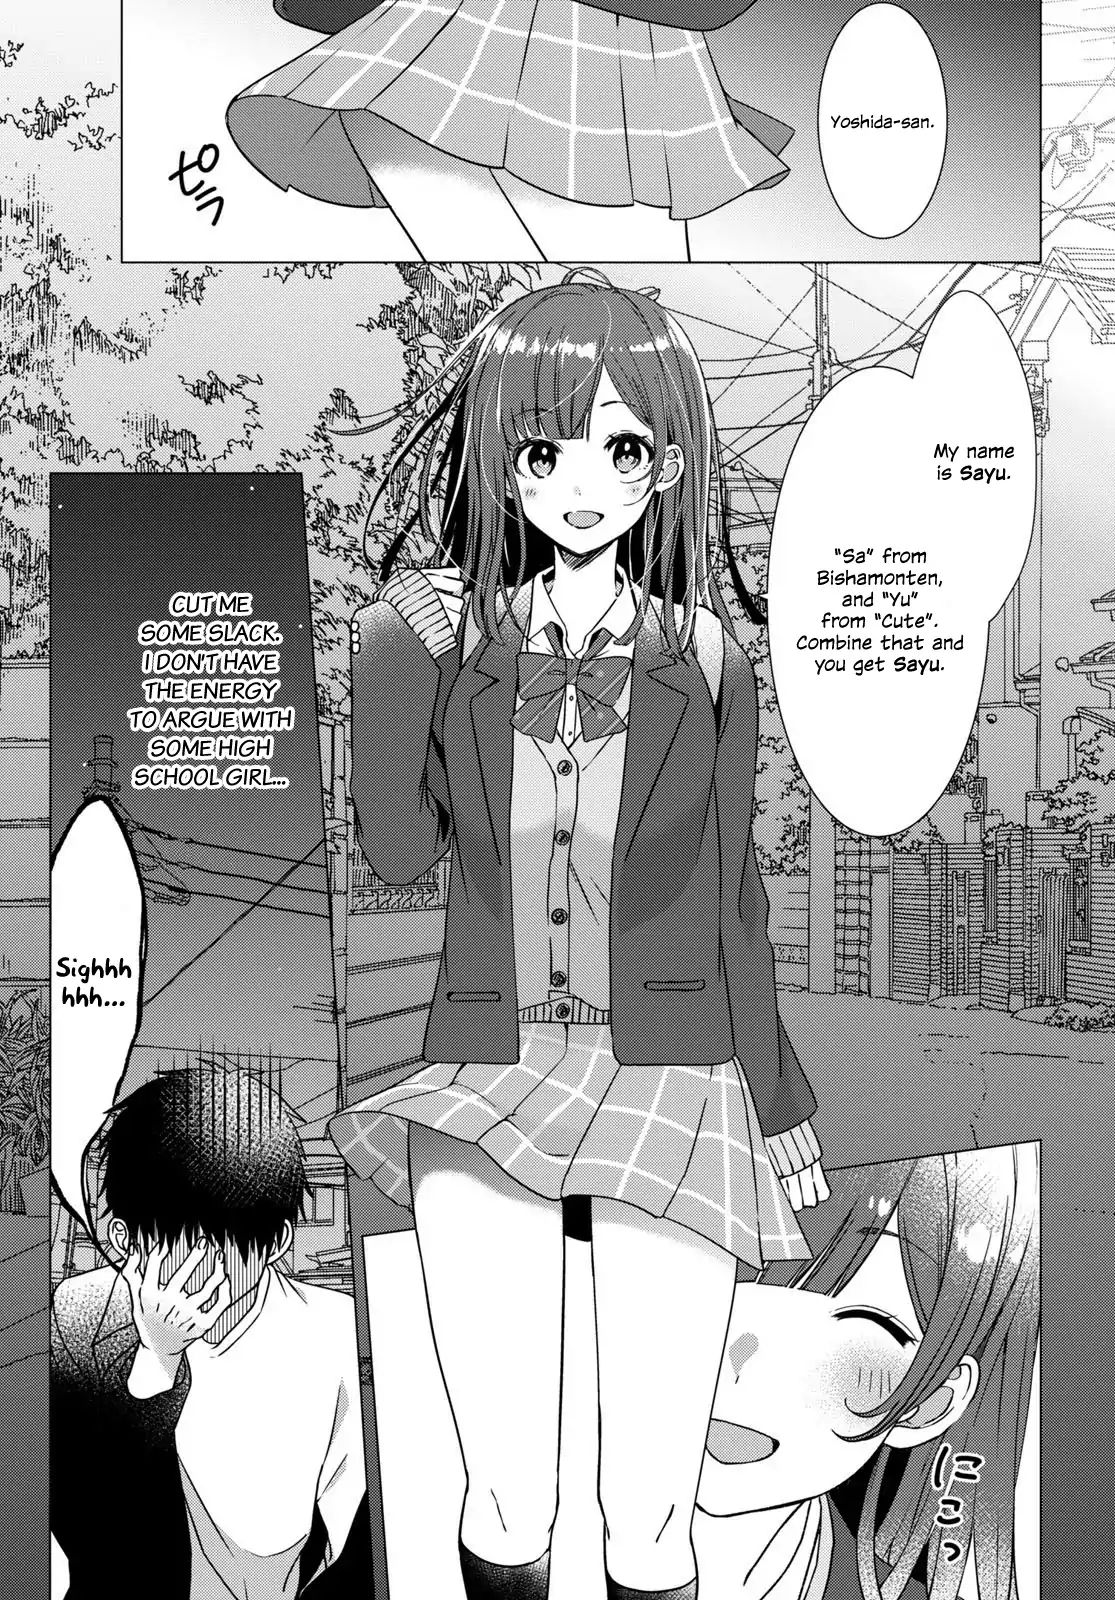 Read I Shaved Then I Brought A High School Girl Home Manga English New Chapters Online Free Mangaclash